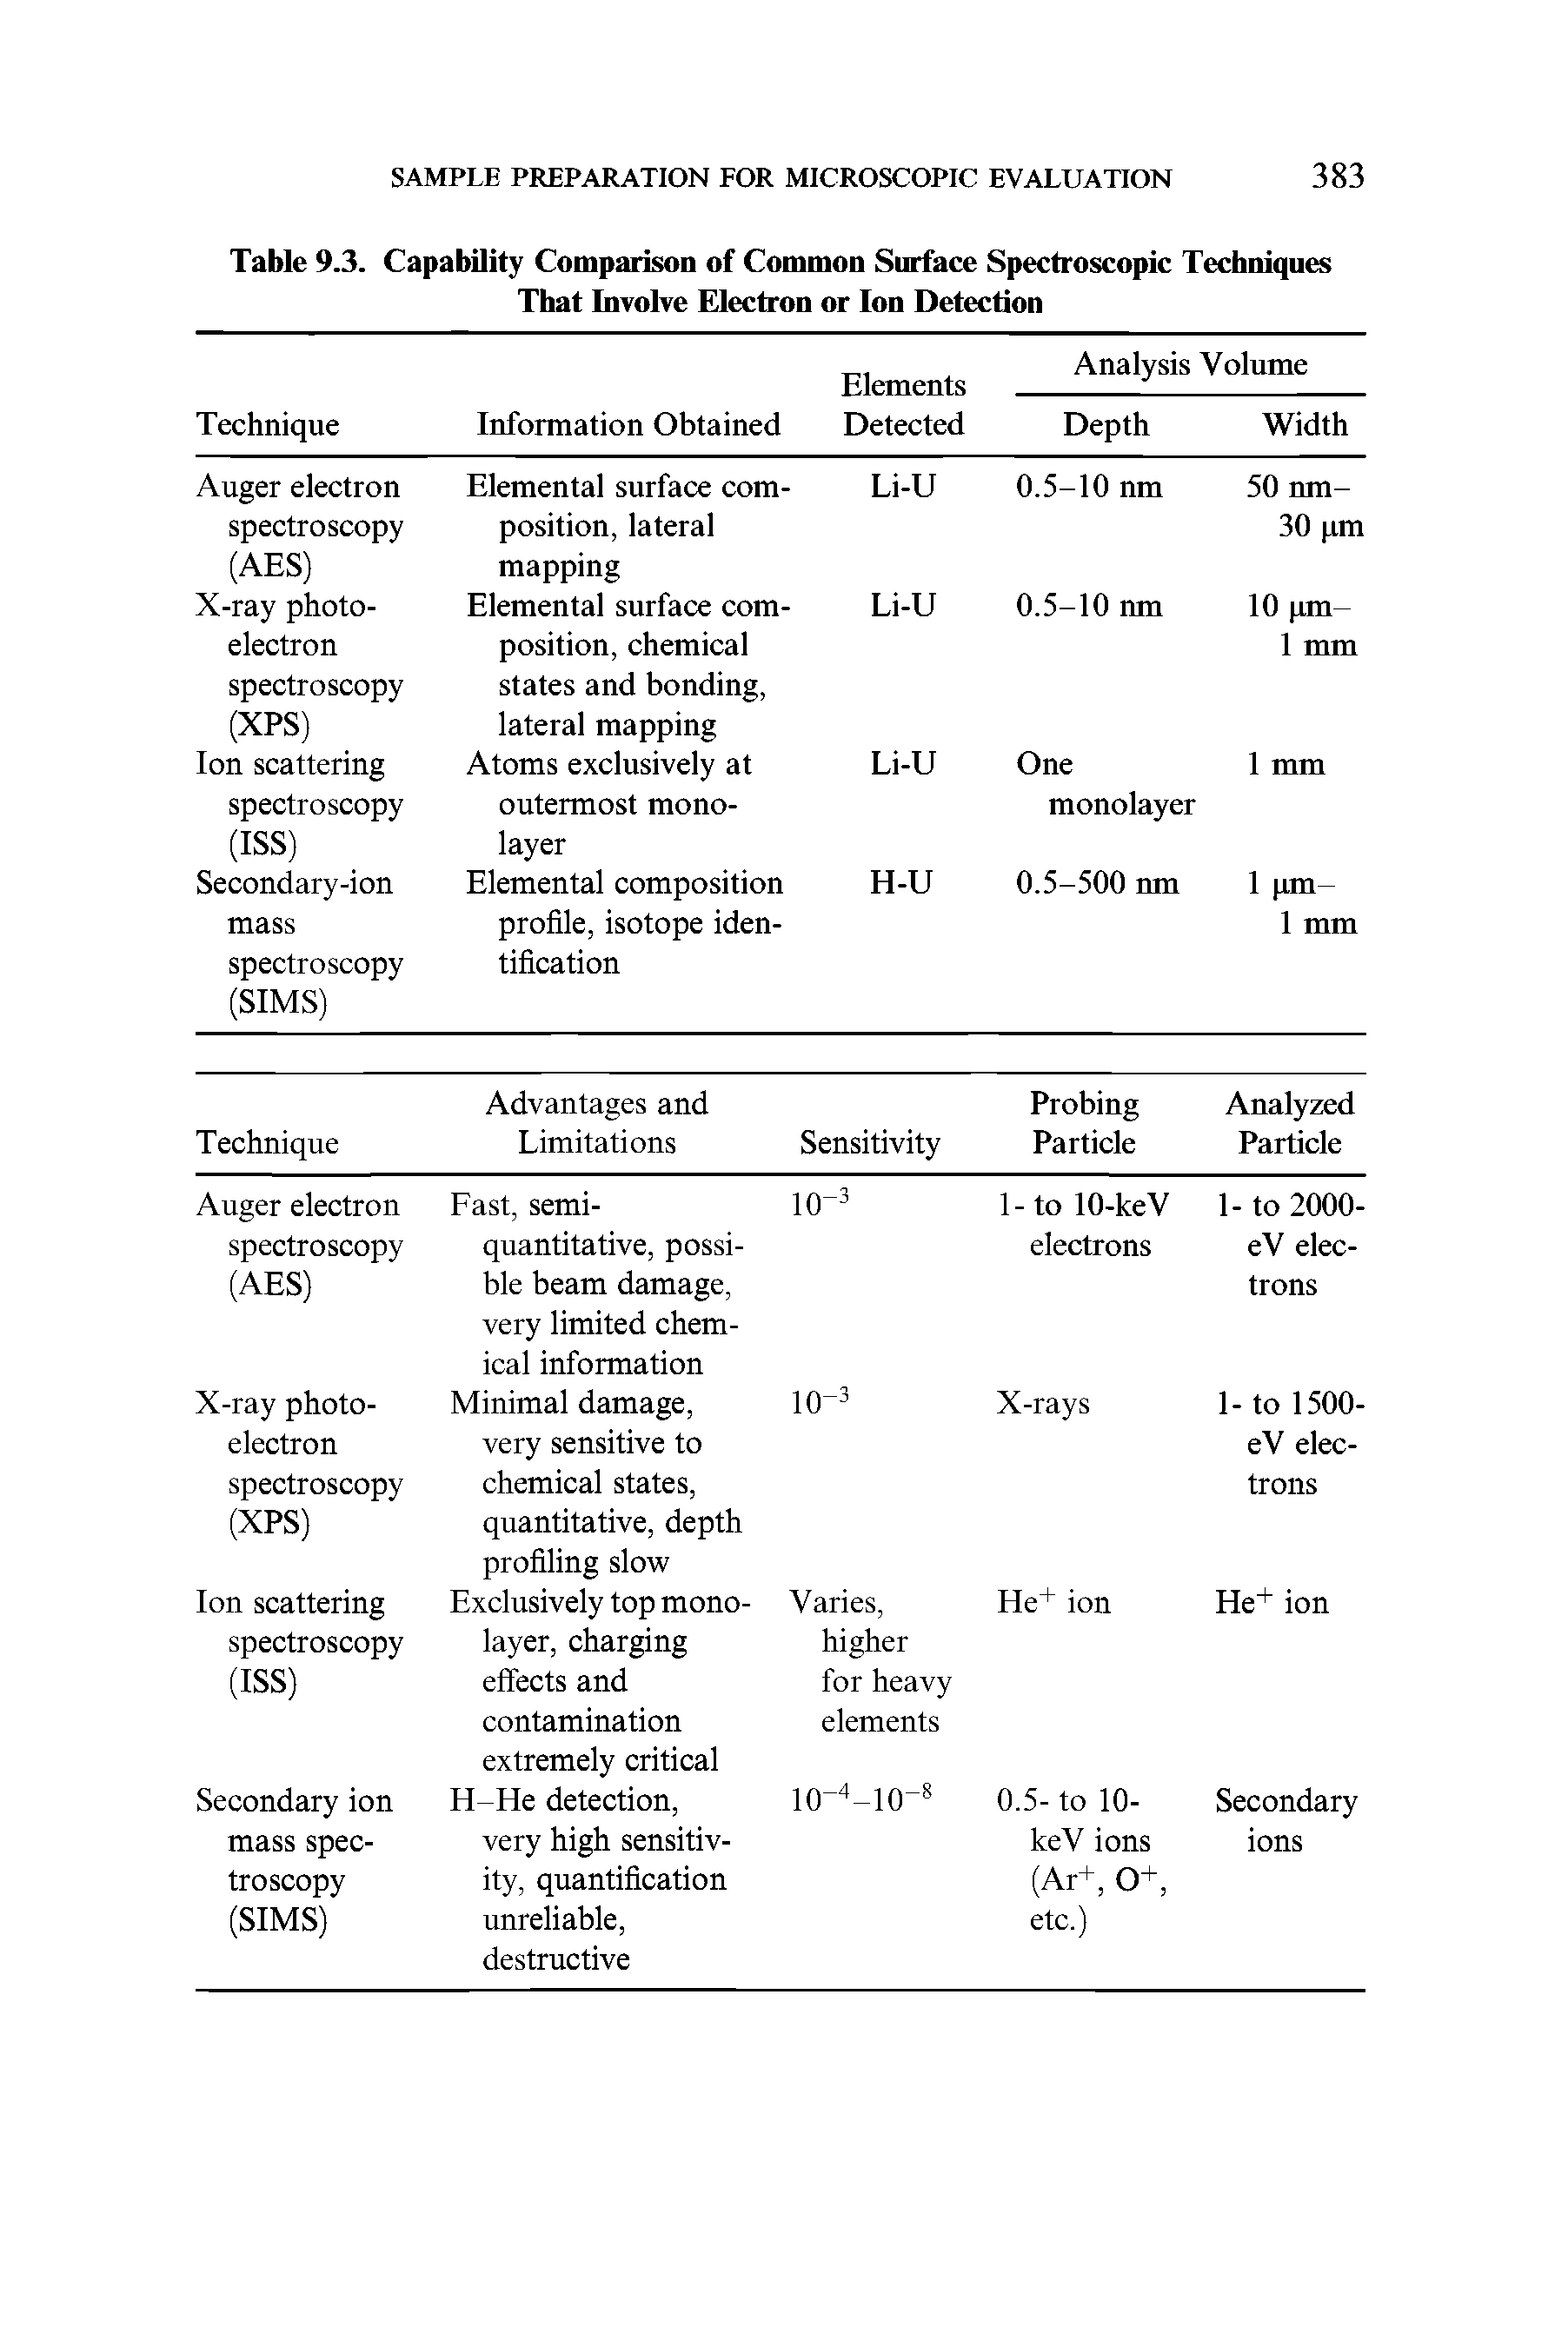 Table 9.3. Capability Comparison of Common Surface Spectroscopic Techniques That Involve Electron or Ion Detection...